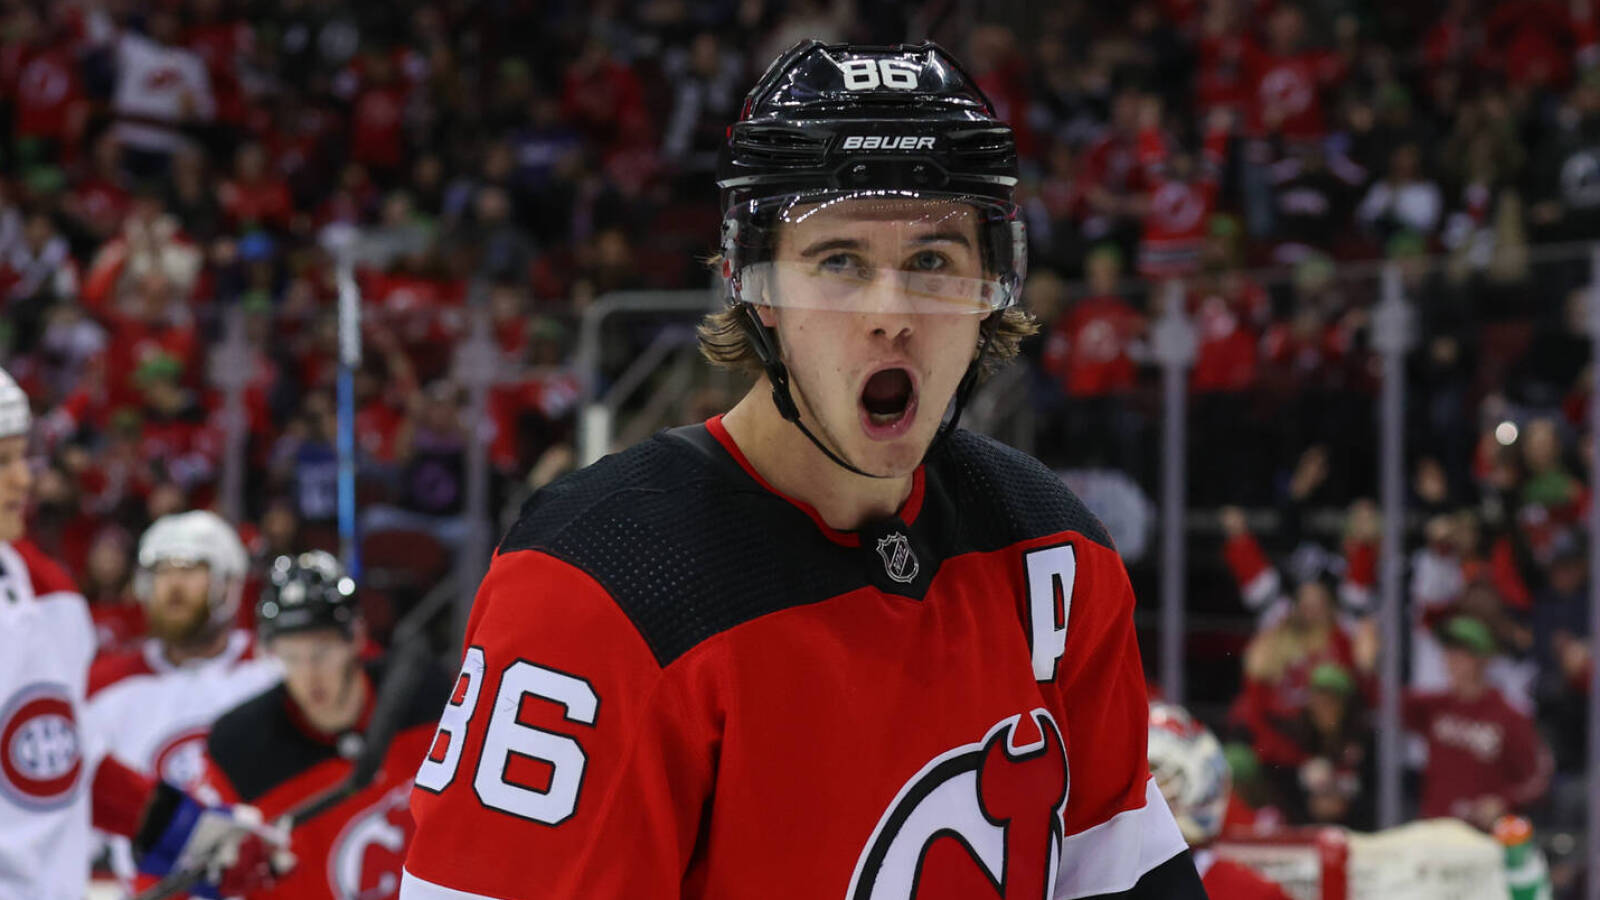 For Jack Hughes, a Devils playoff run is a chance to confirm his